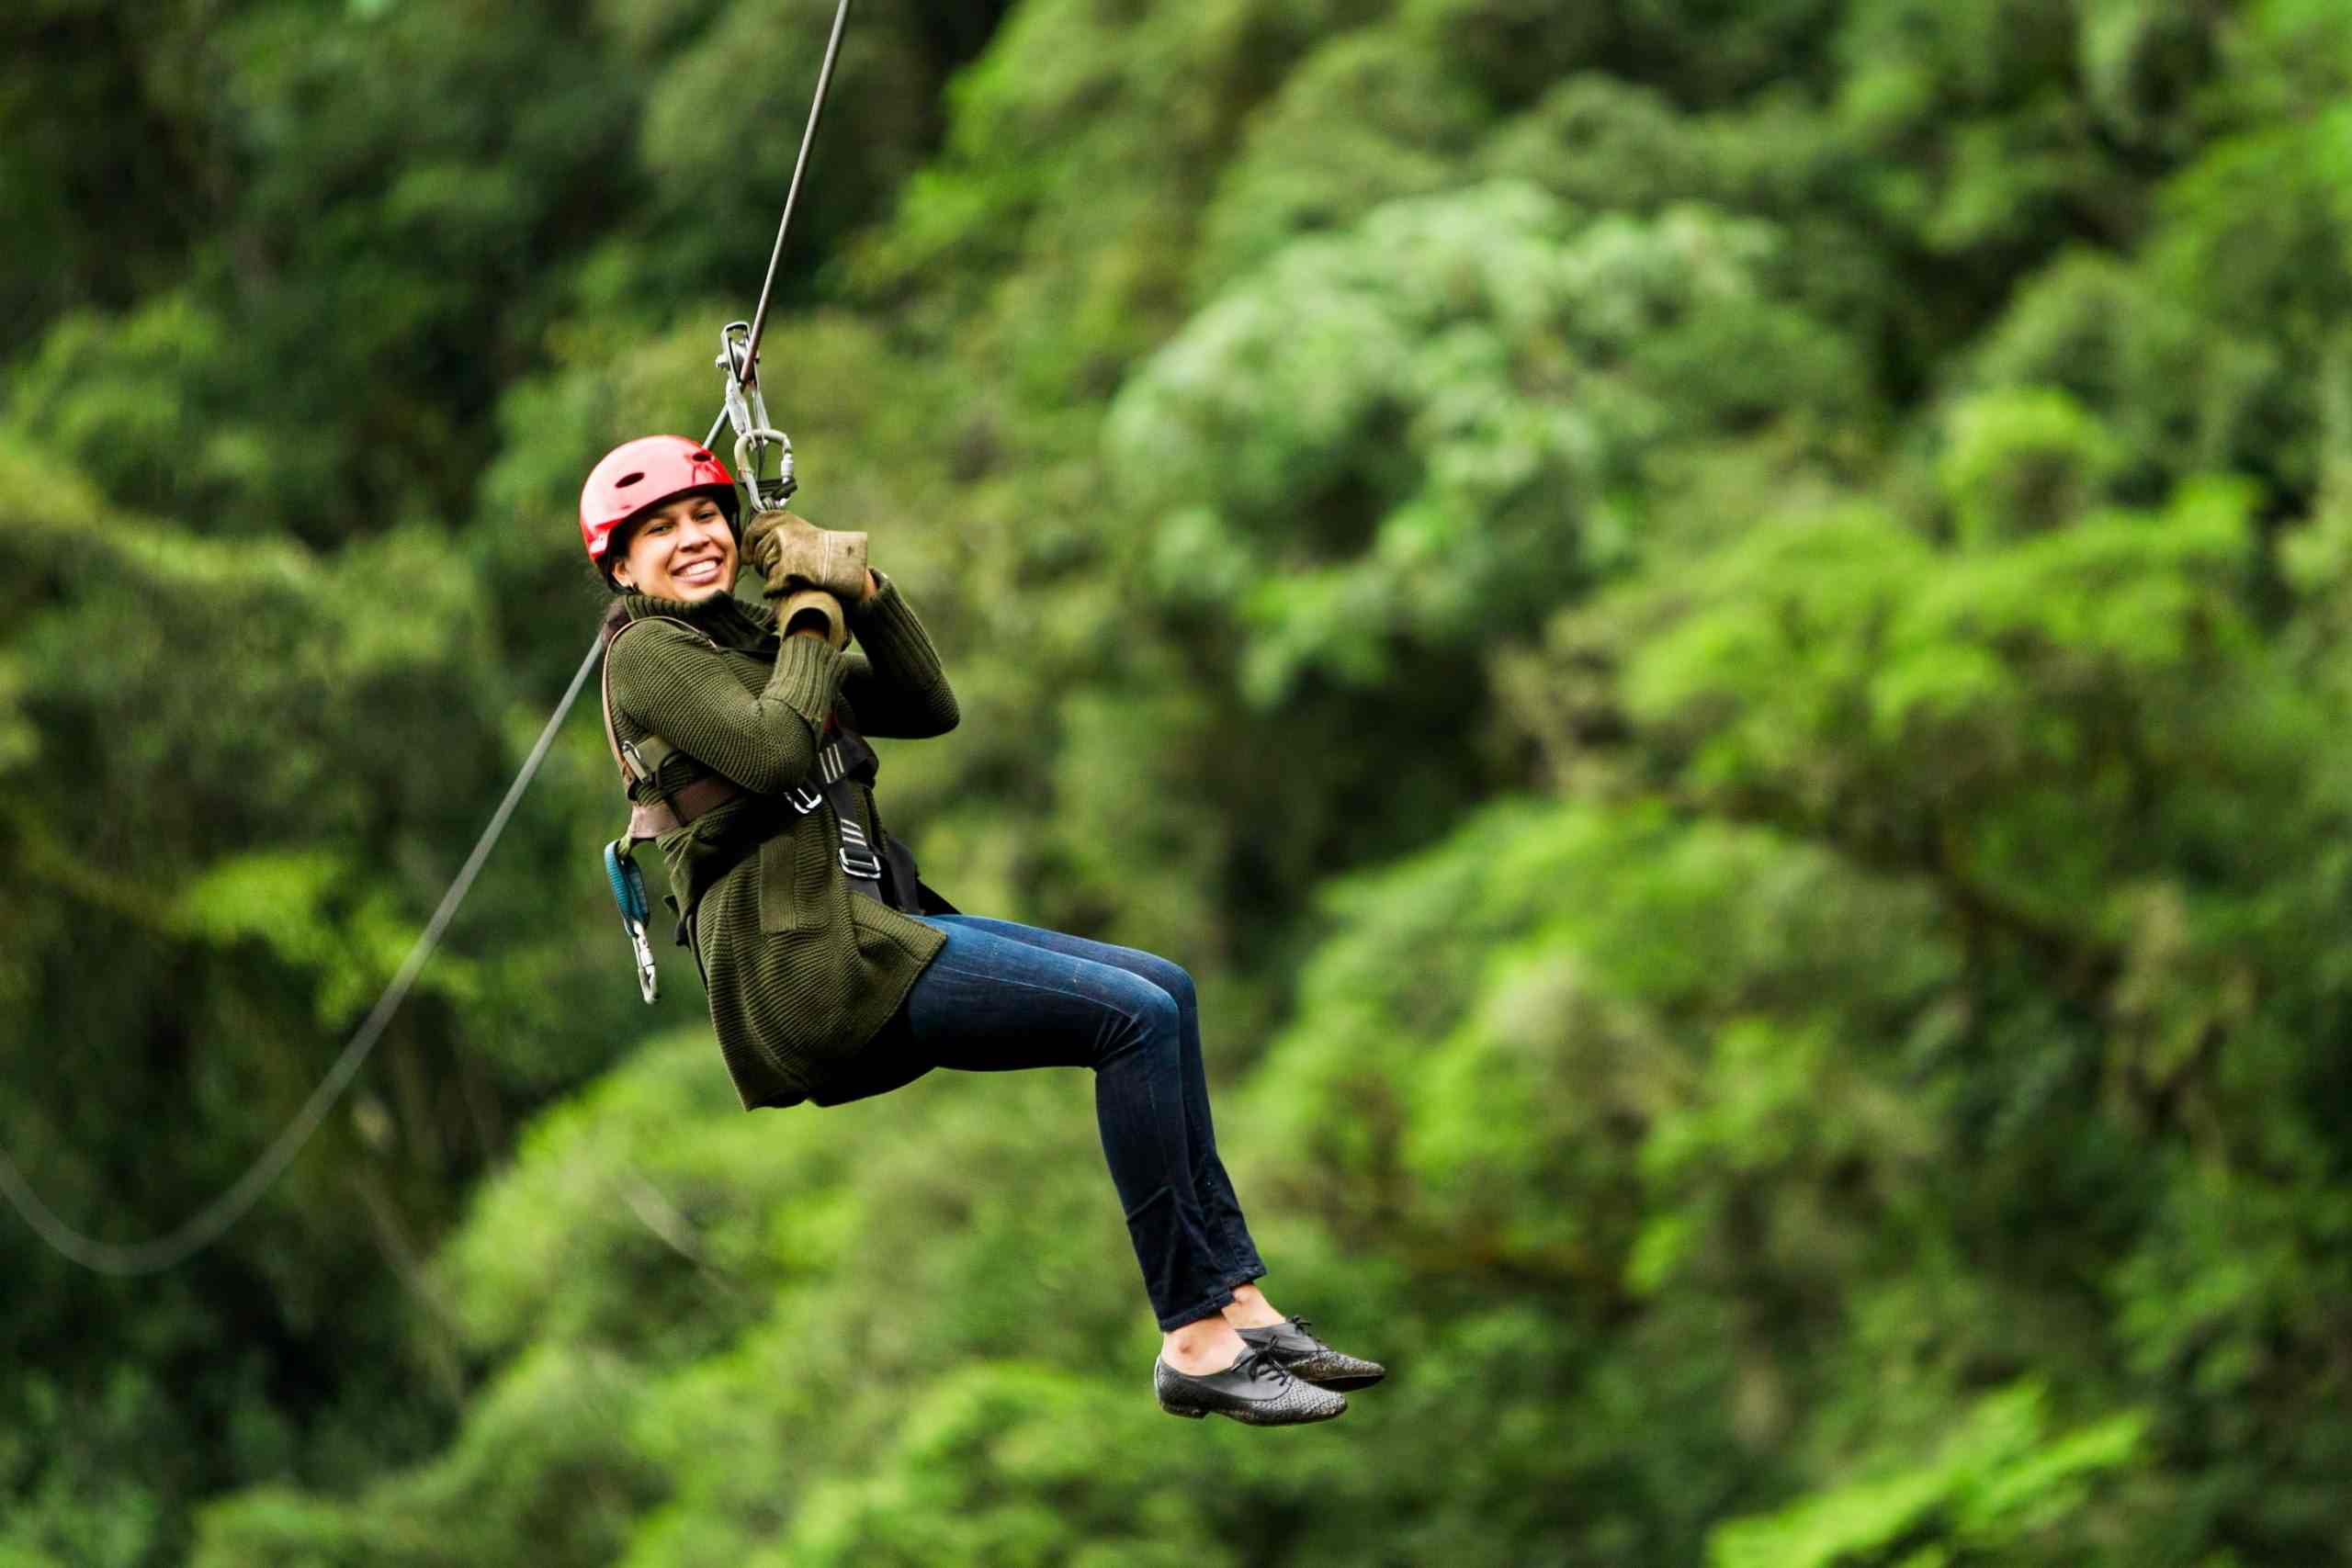 Bocawina Zipline Adventure: Close-up of a woman ziplining, capturing the excitement of the experience.